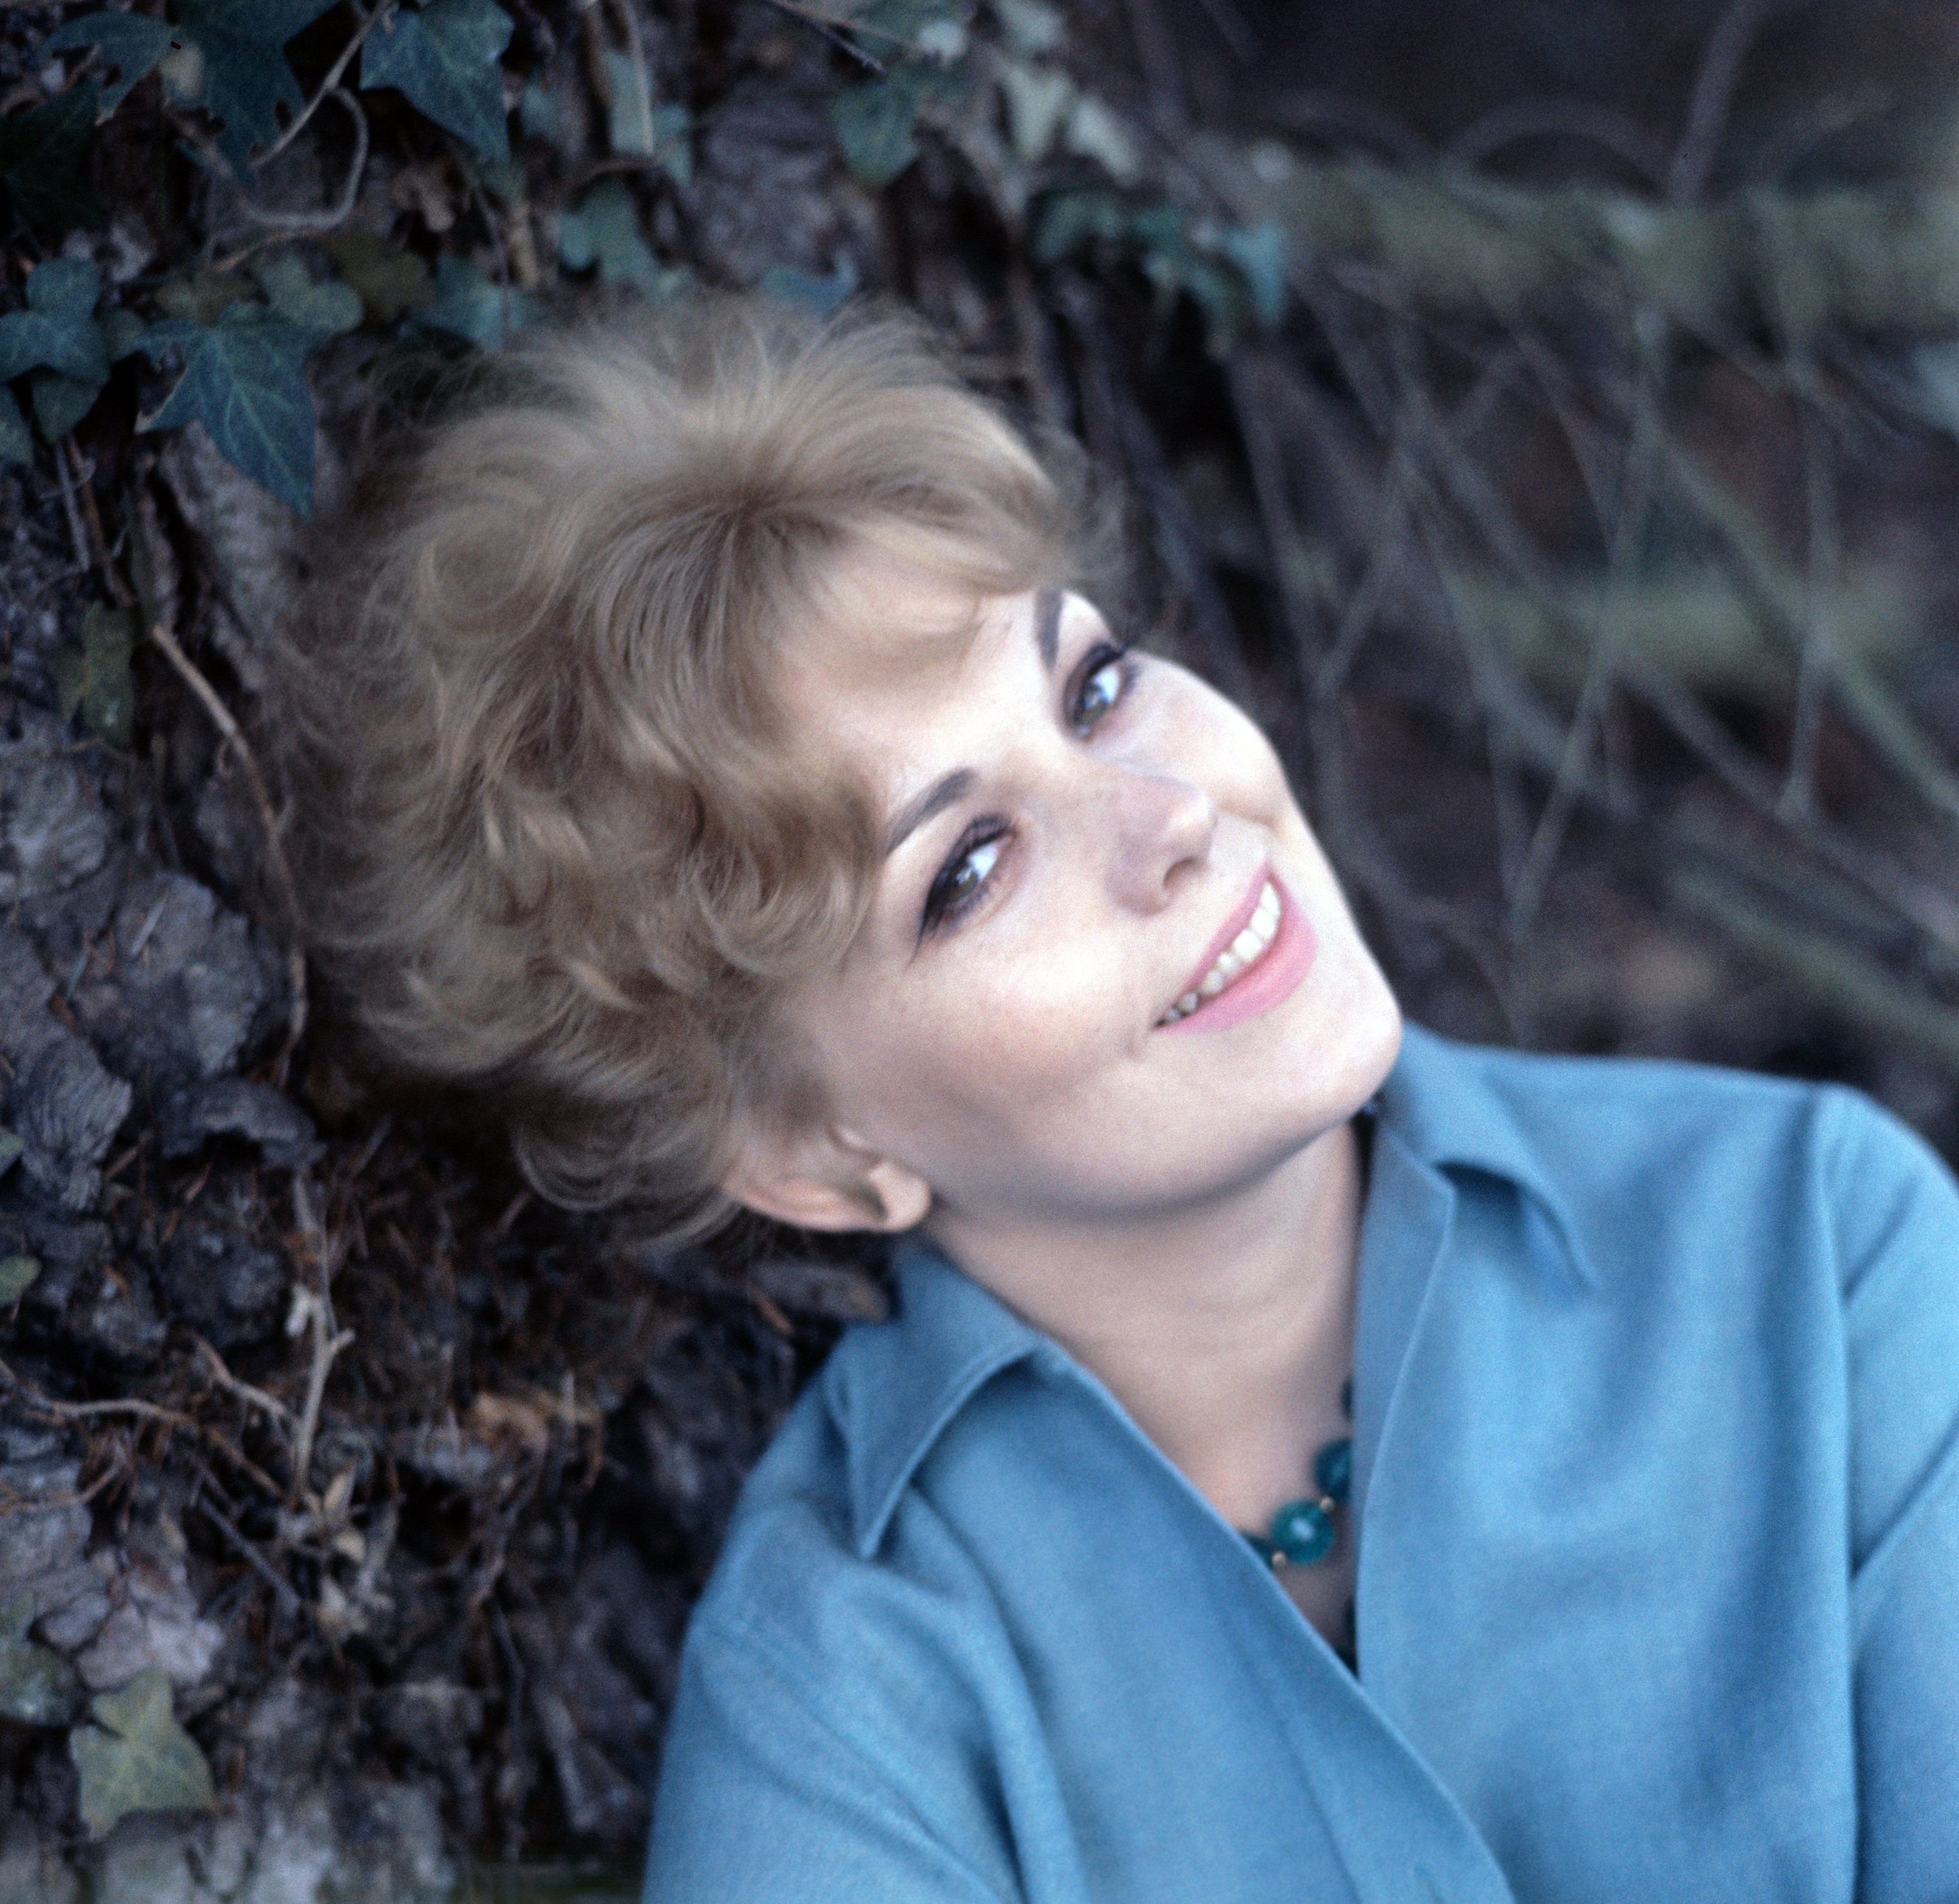 Actress Kim Novak posing during a photoshoot on January 1, 1950 ┃Source: Getty Images